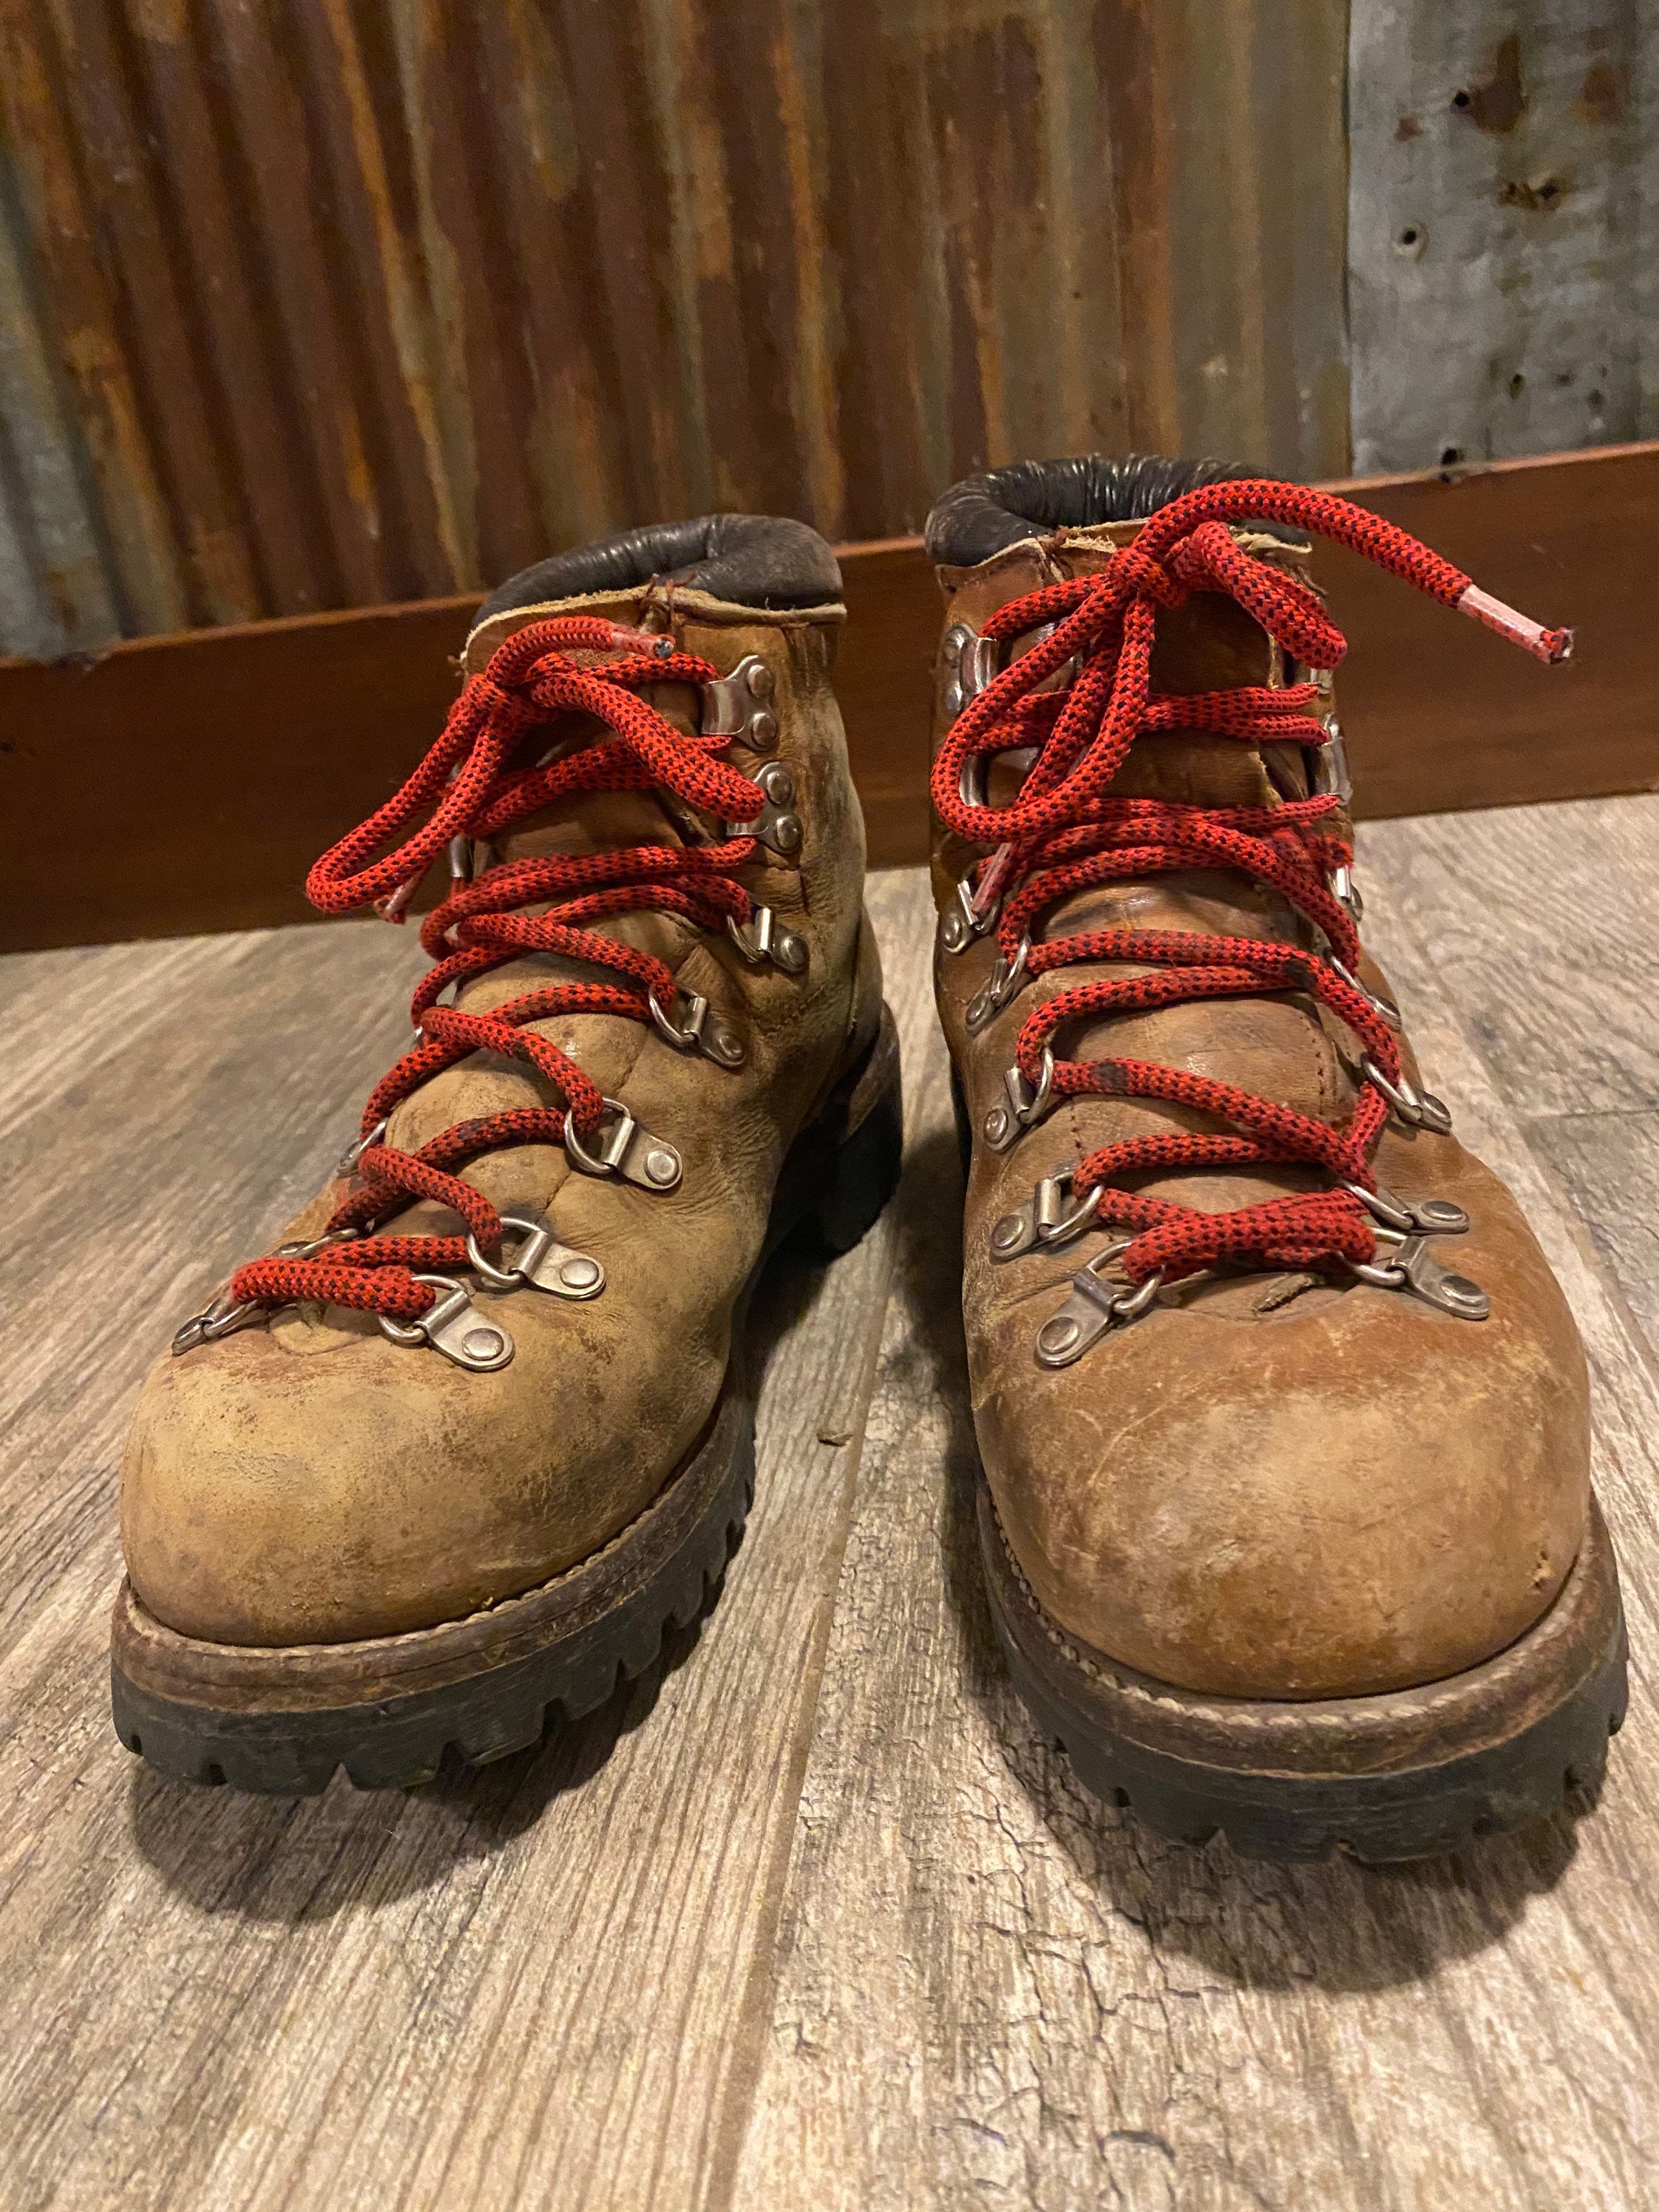 Vintage Red Wing Hiking Boots - Etsy